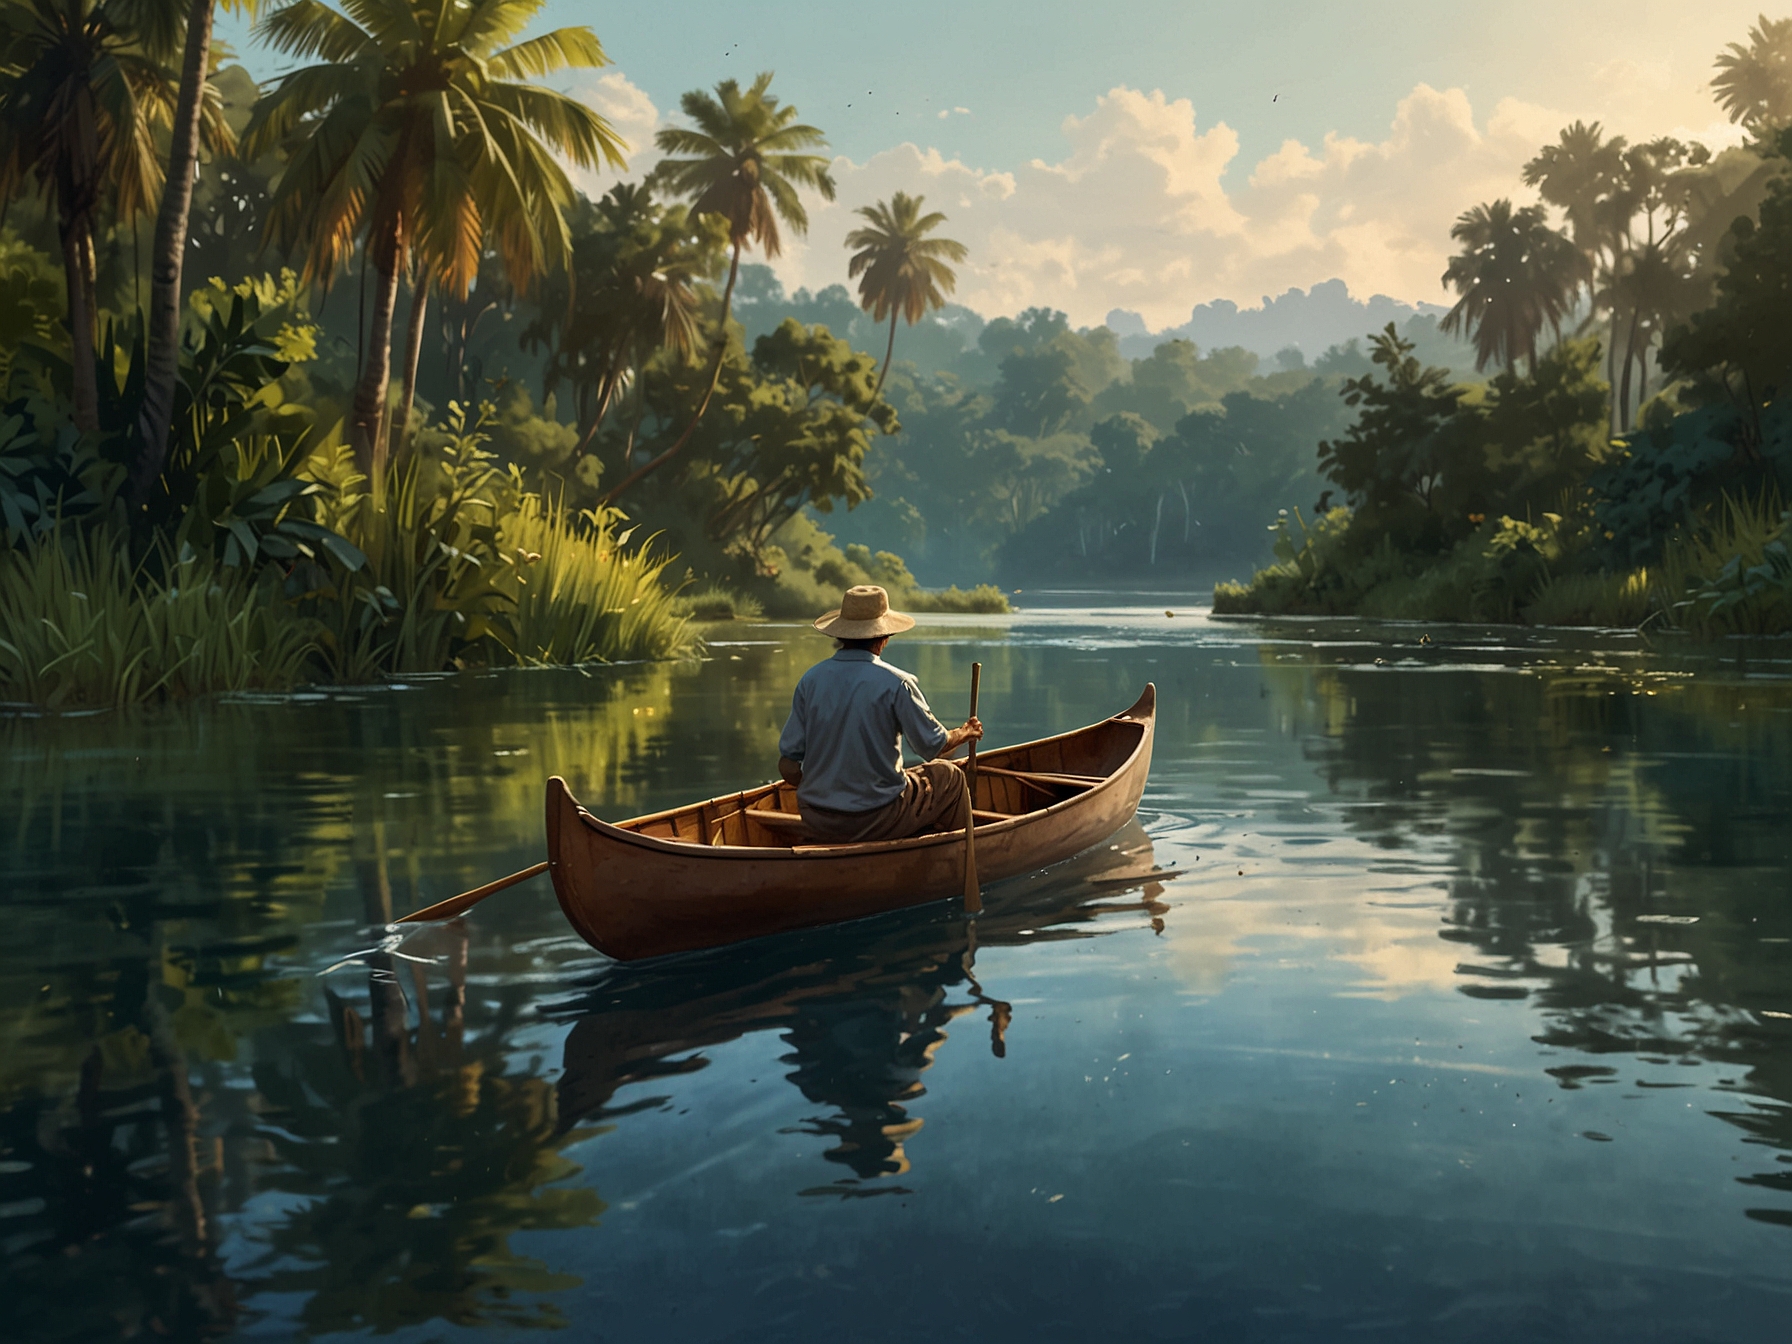 A couple paddles through a serene waterway on a canoe safari, surrounded by lush greenery, spotting otters and storks in their natural habitats.